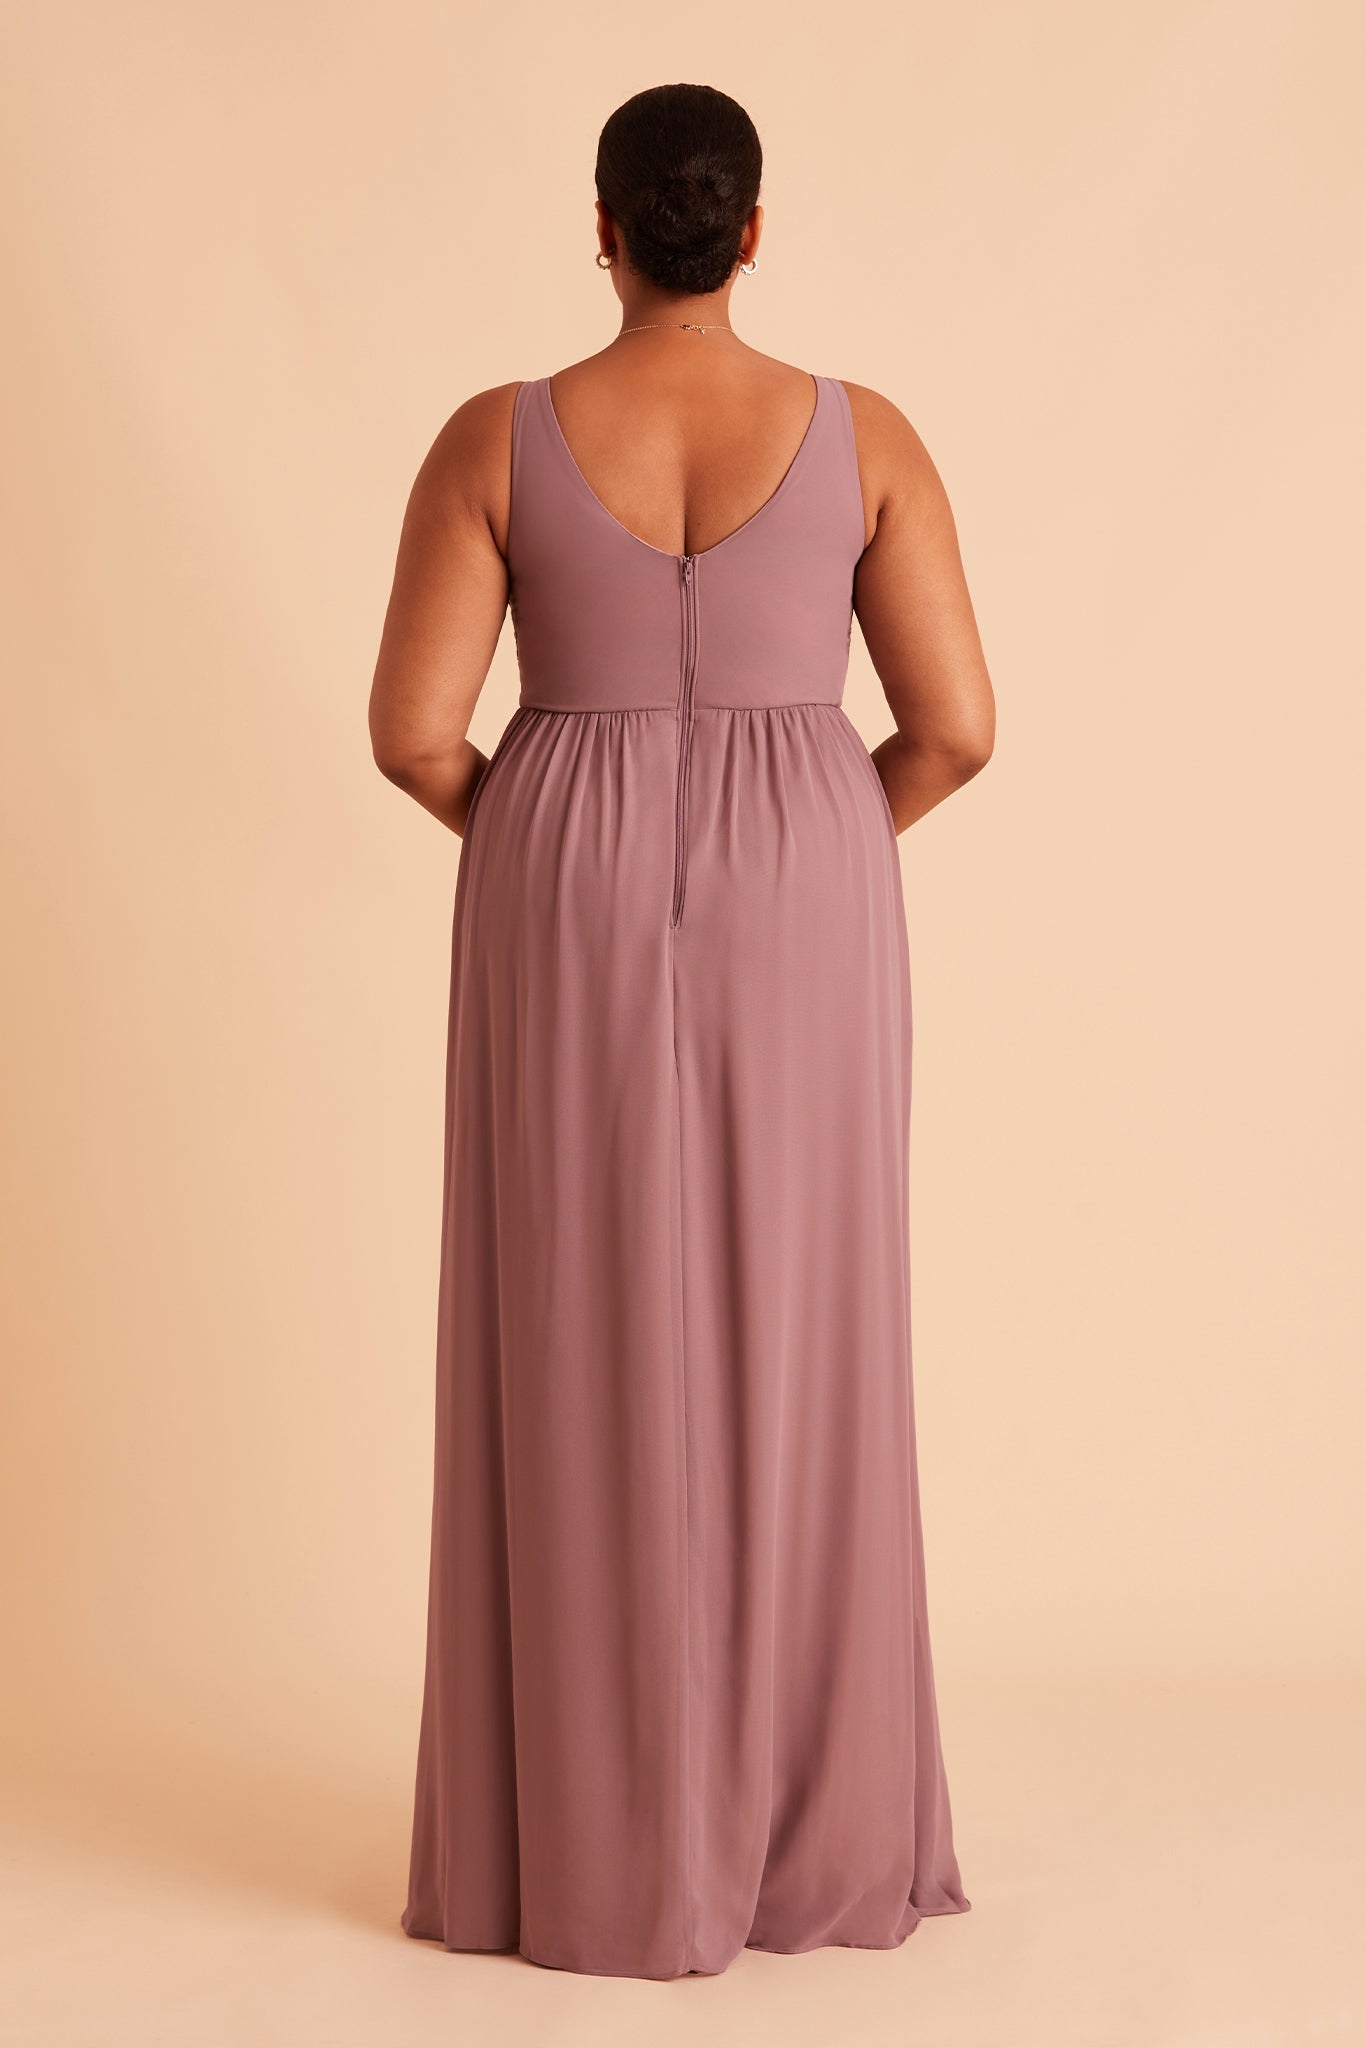 Laurie Empire plus size maternity bridesmaid dress with slit in dark mauve chiffon by Birdy Grey, back view